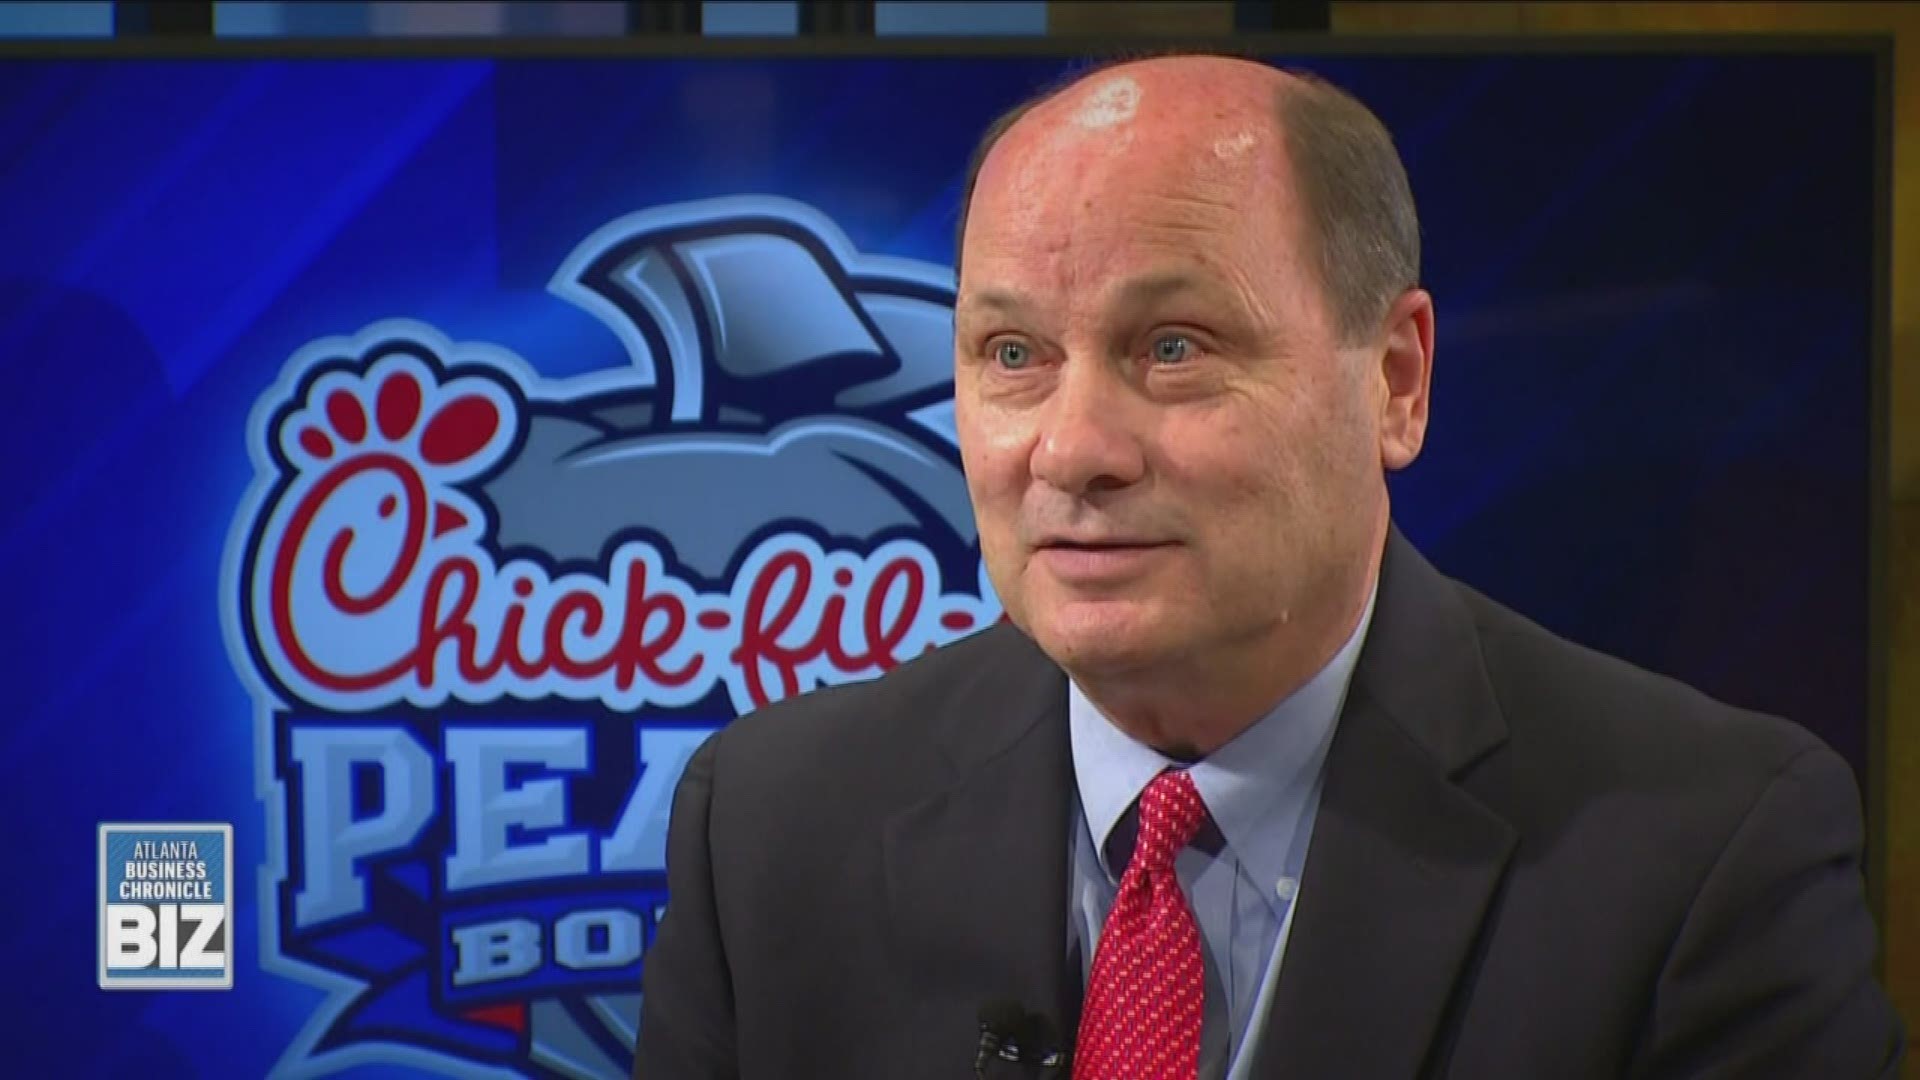 Chick-fil-A Peach Bowl President/CEO Gary Stokan sits down with Atlanta Business Chronicle's David Rubinger on 11Alive.